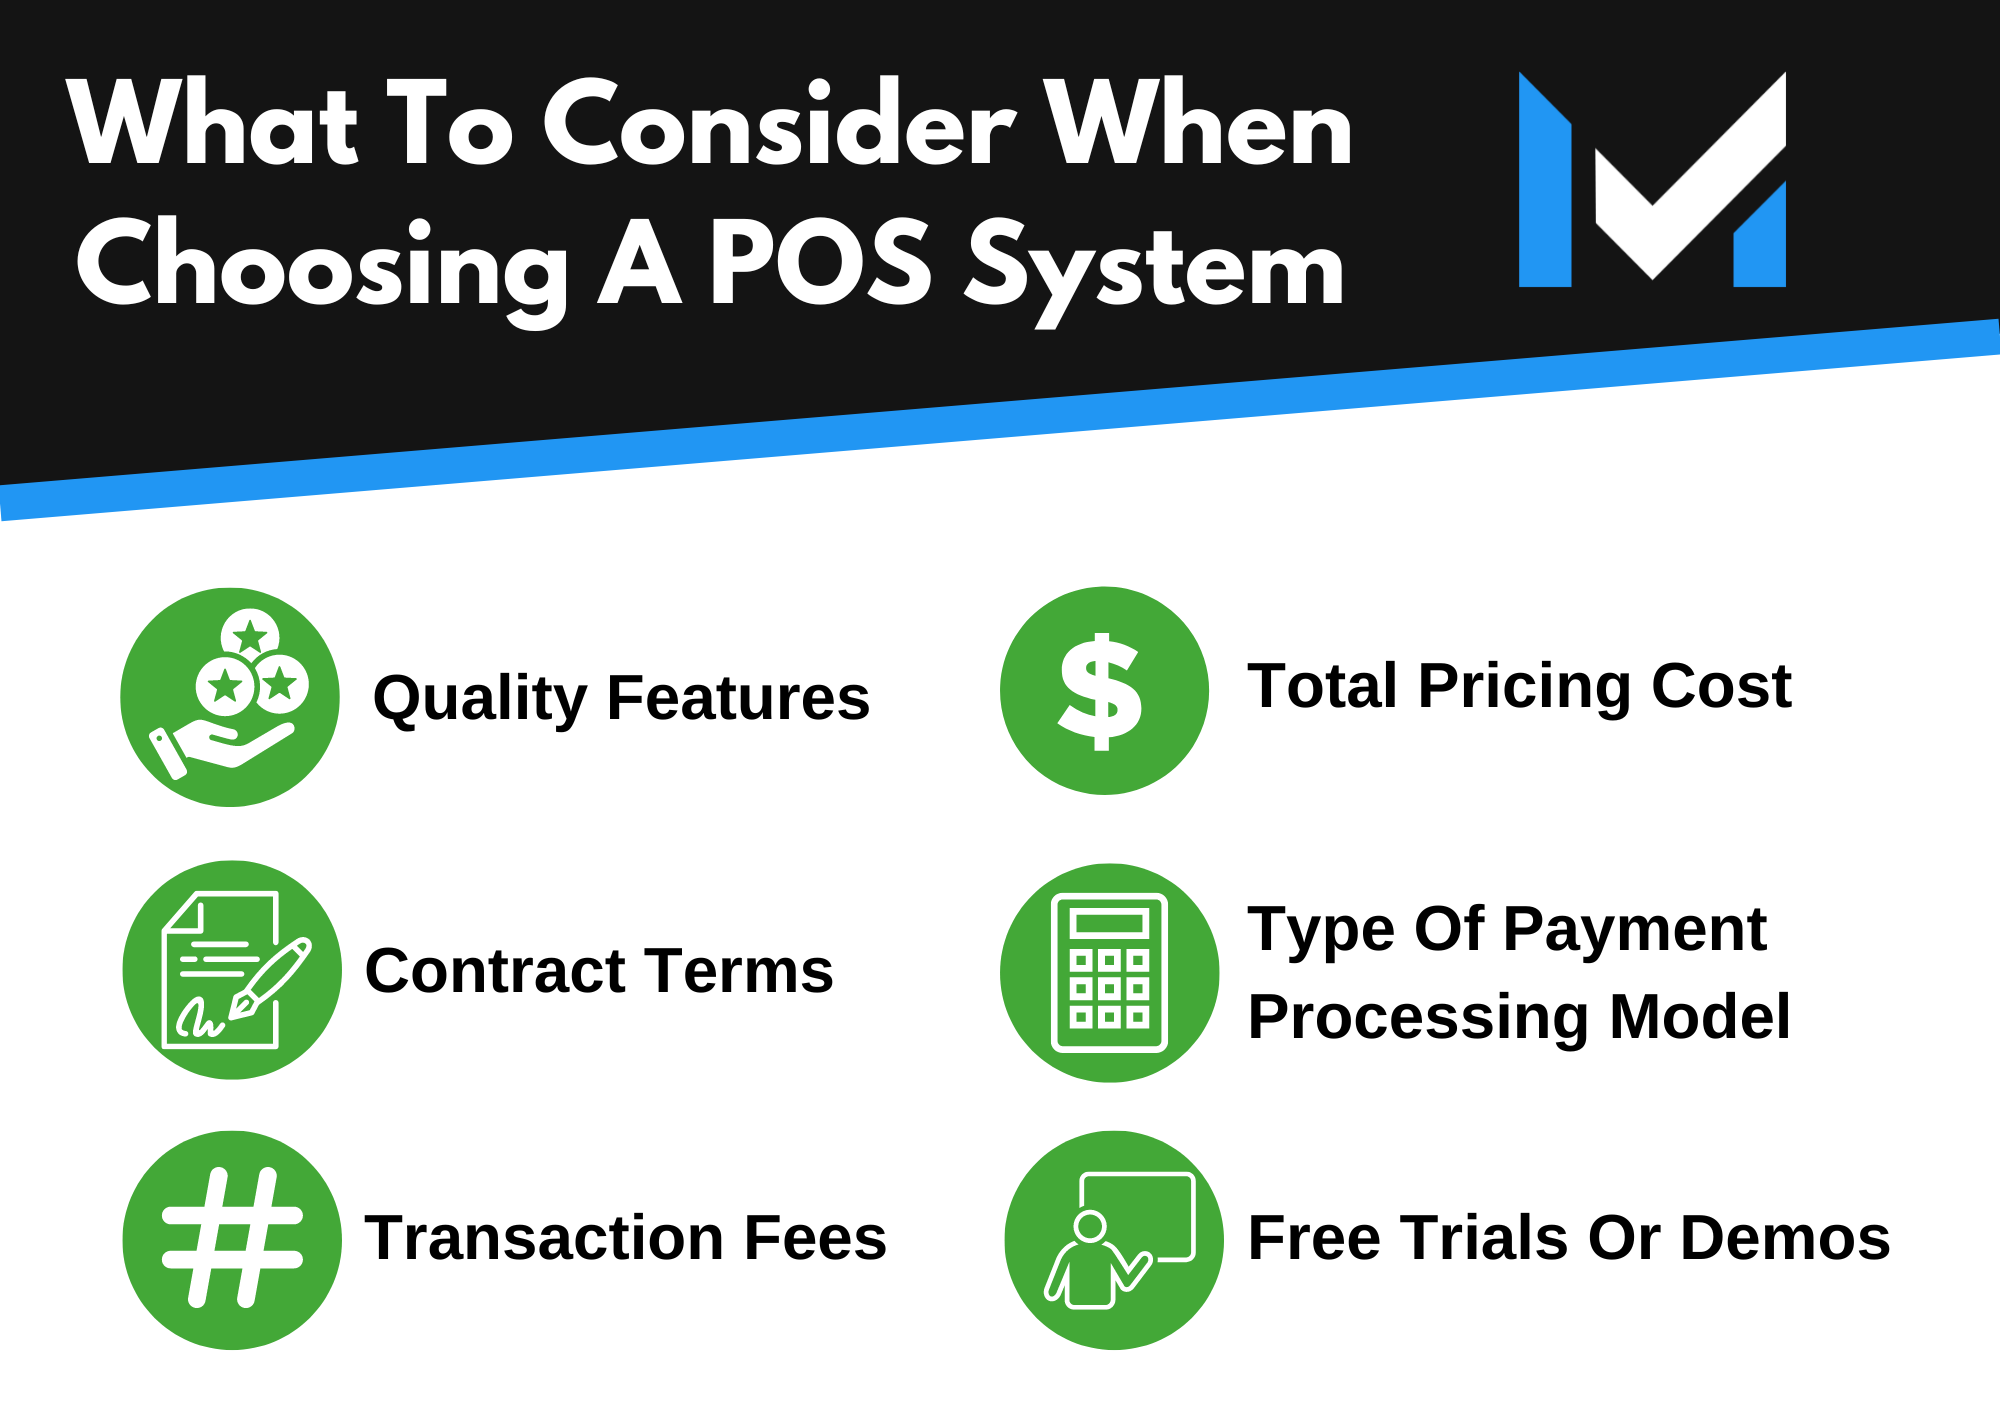 What to consider when choosing a POS